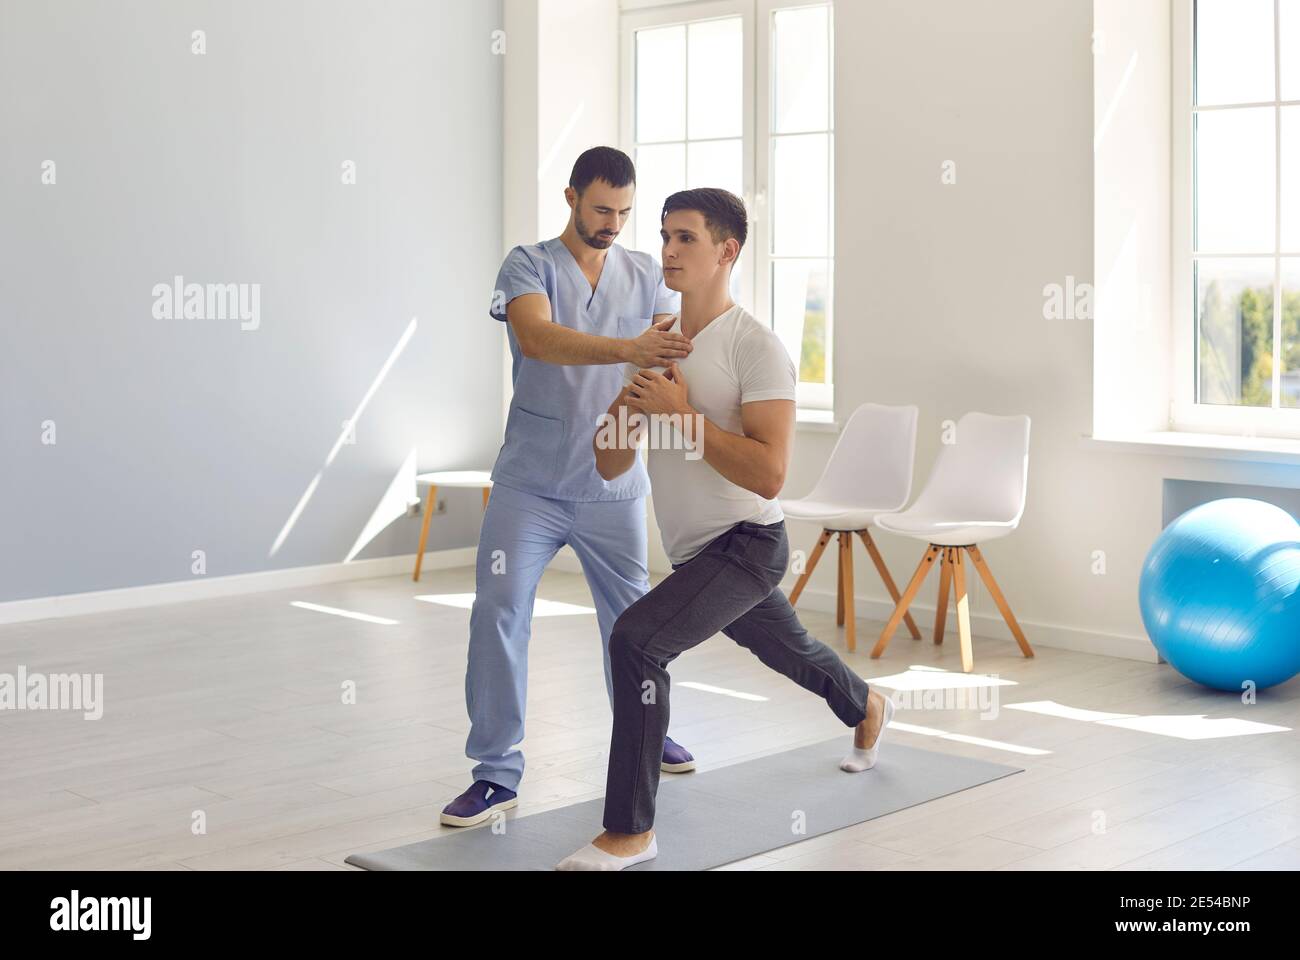 Osteopath fixing and controlling man patients movements during exercising on fitness mat Stock Photo